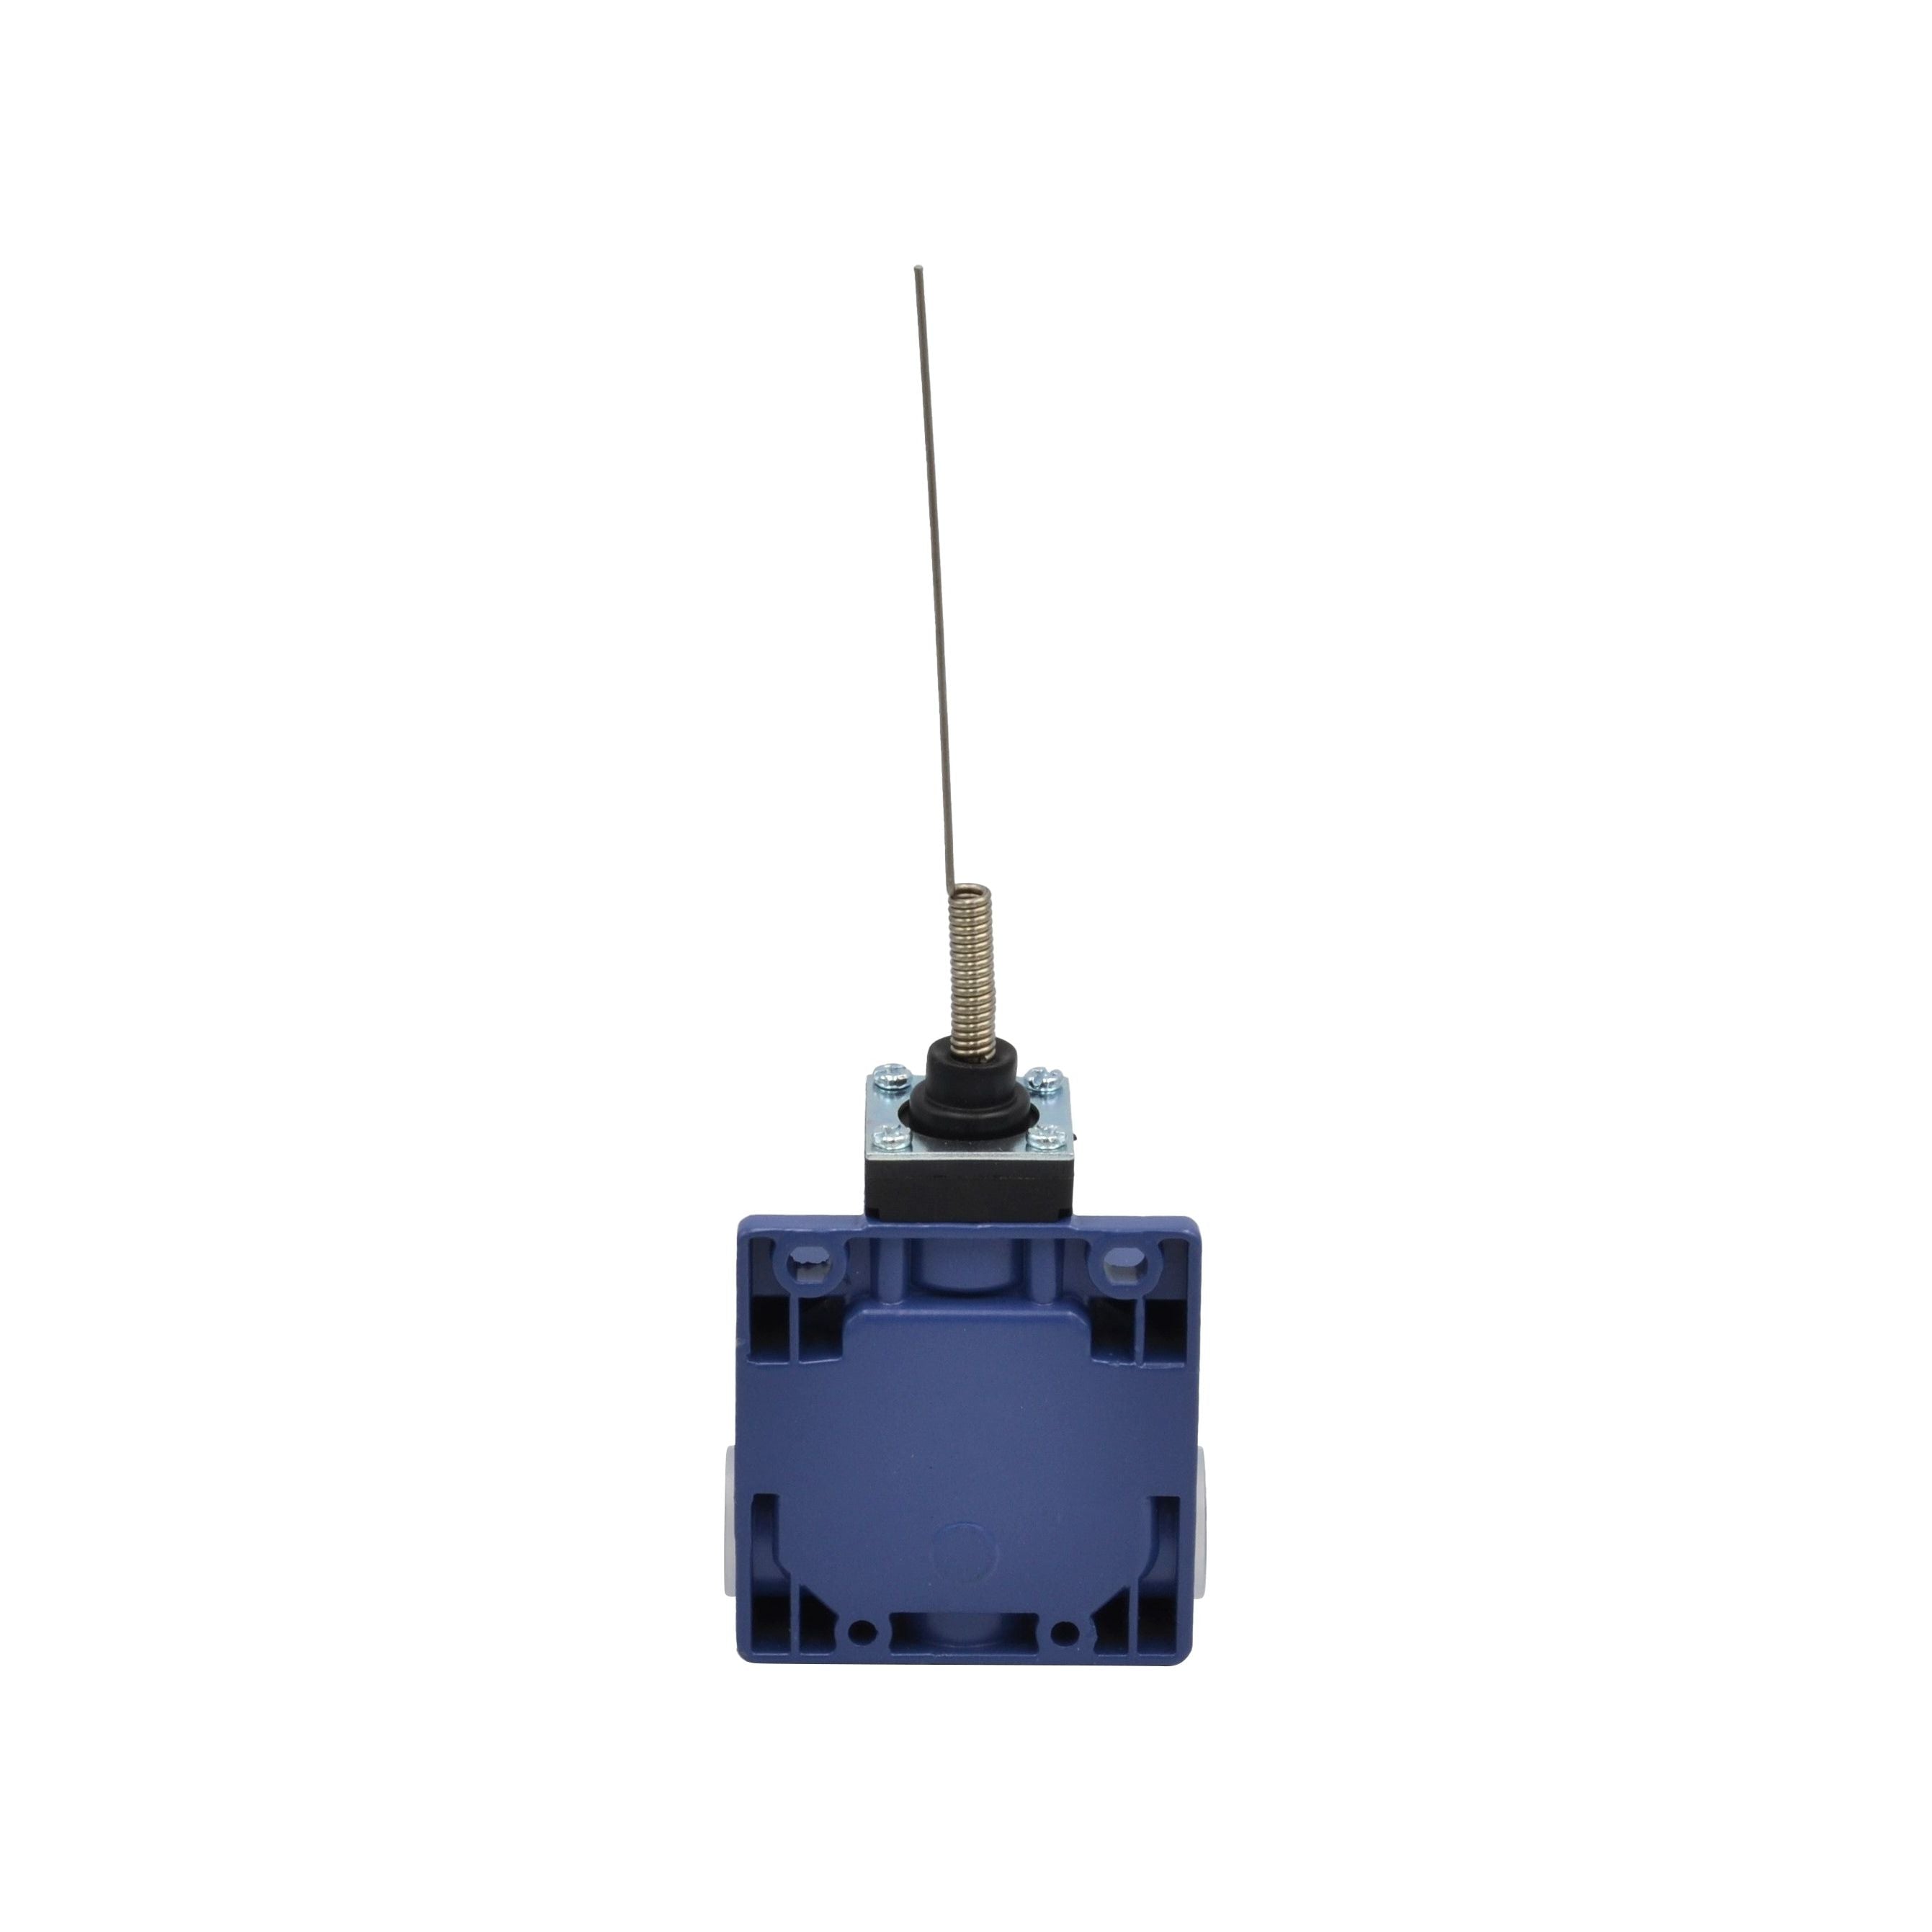 XCK-M106 Cats Whisker Snap Action Limit Switch